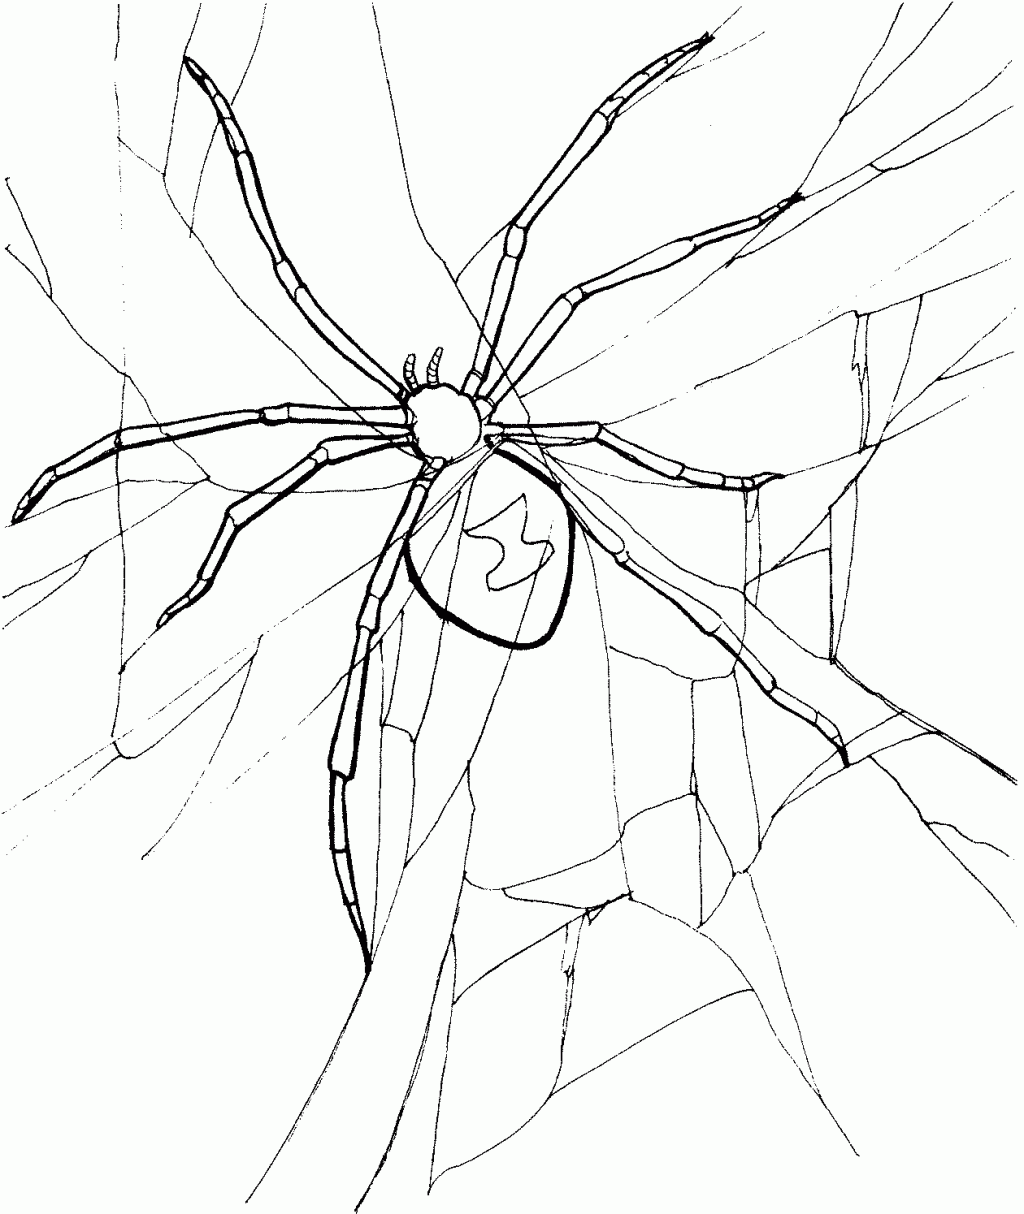 Wolf Spider coloring #17, Download drawings